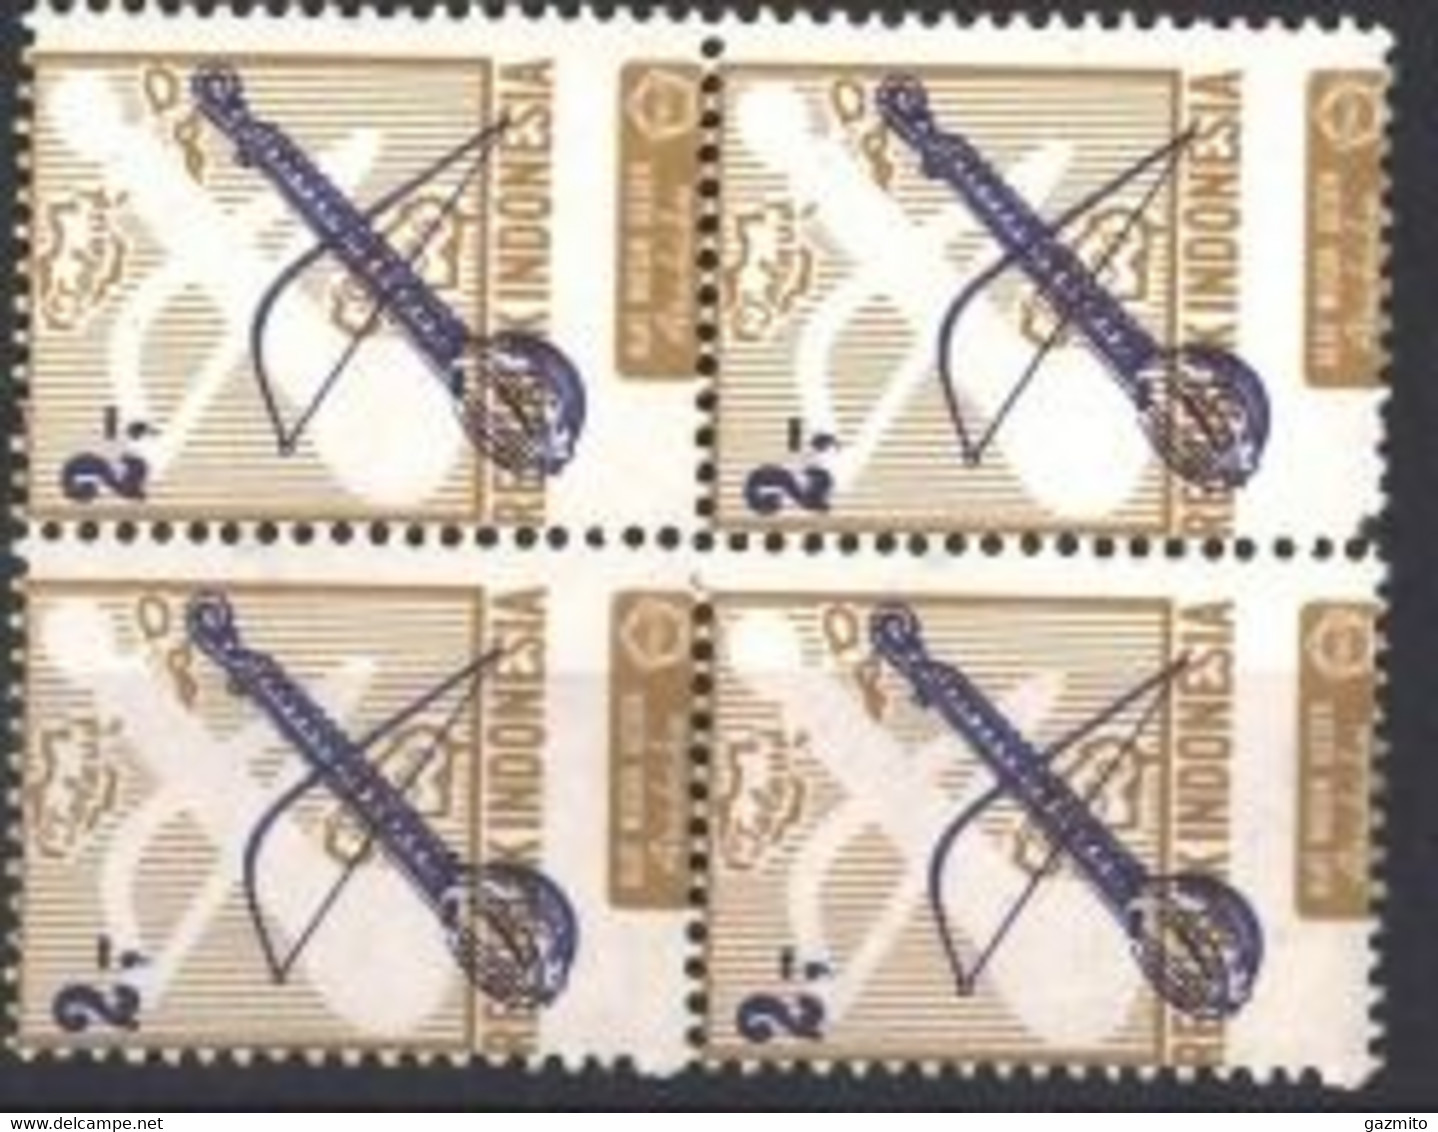 Indonesia 1967, Musical Instrument, 3R, COLOR CUTTING ERROR - Oddities On Stamps